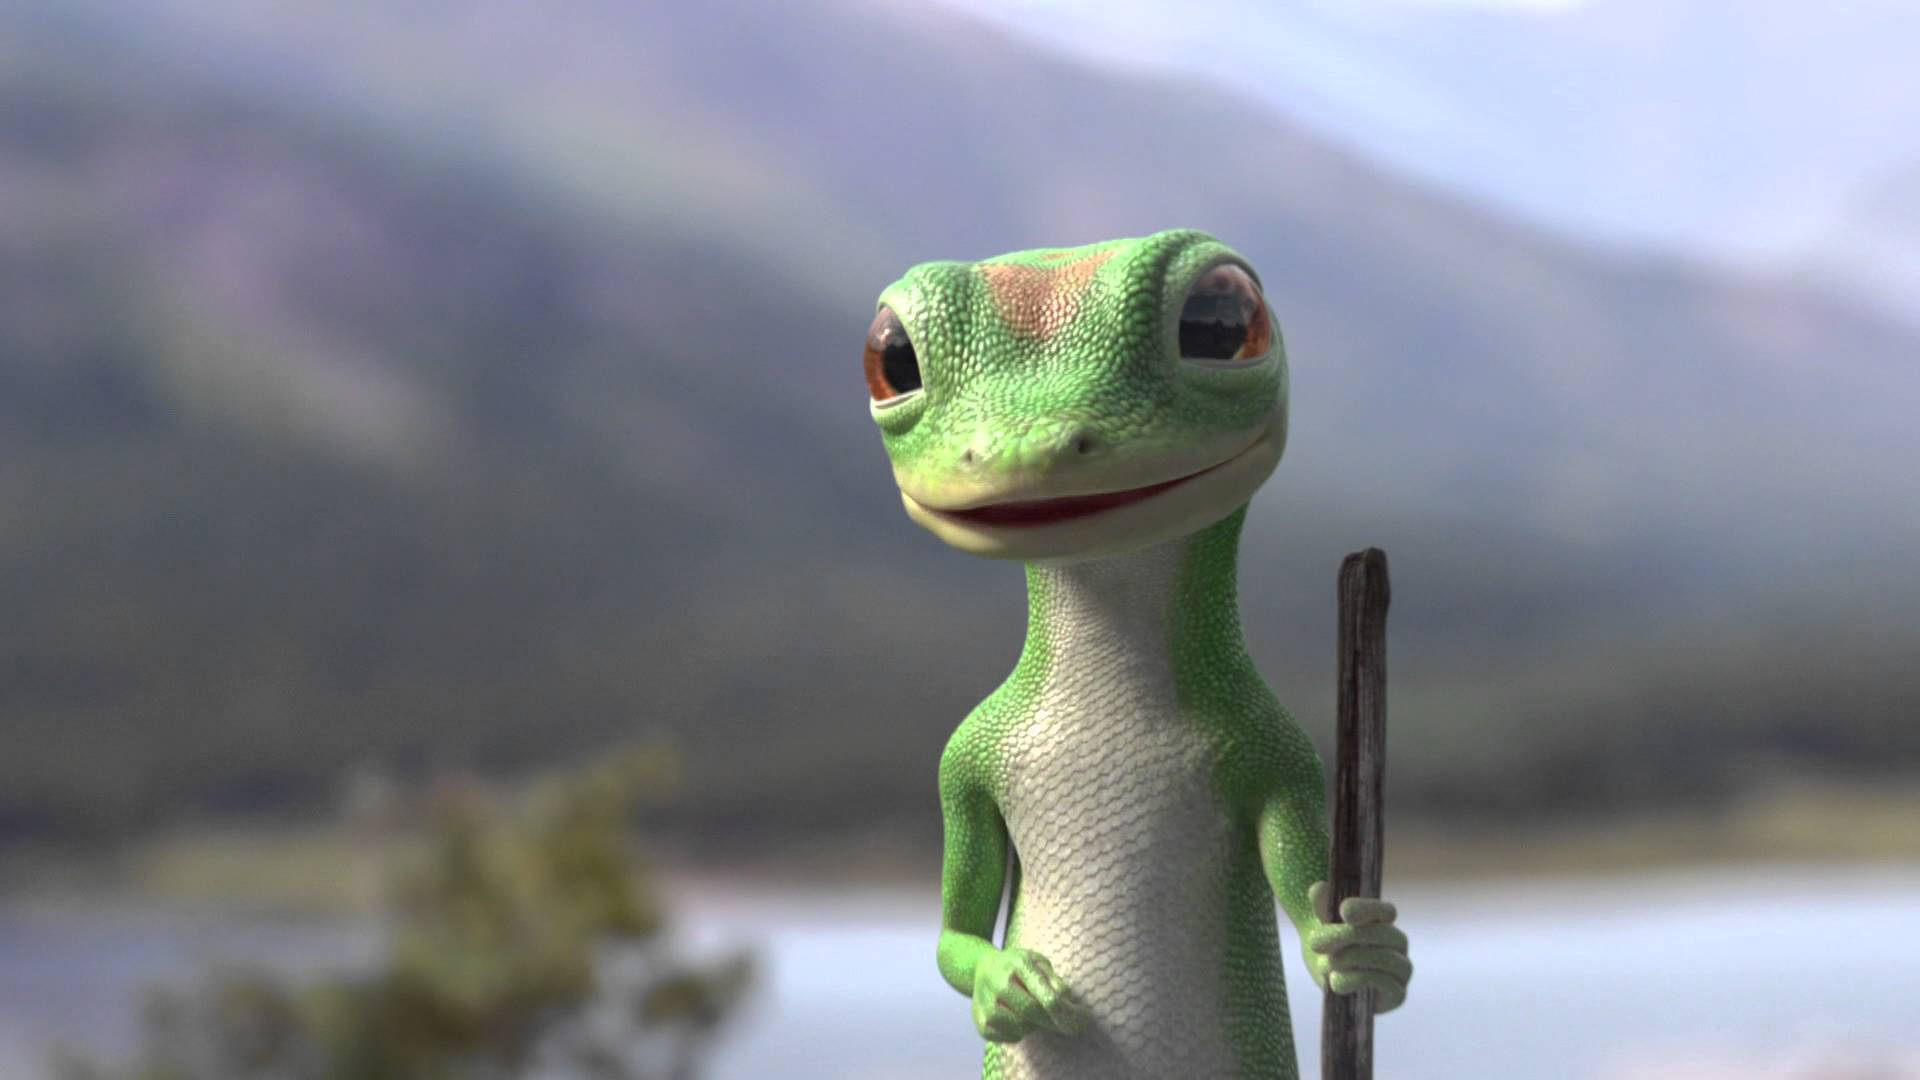 Geico Car Insurance - Reliable Coverage You Can Trust Background